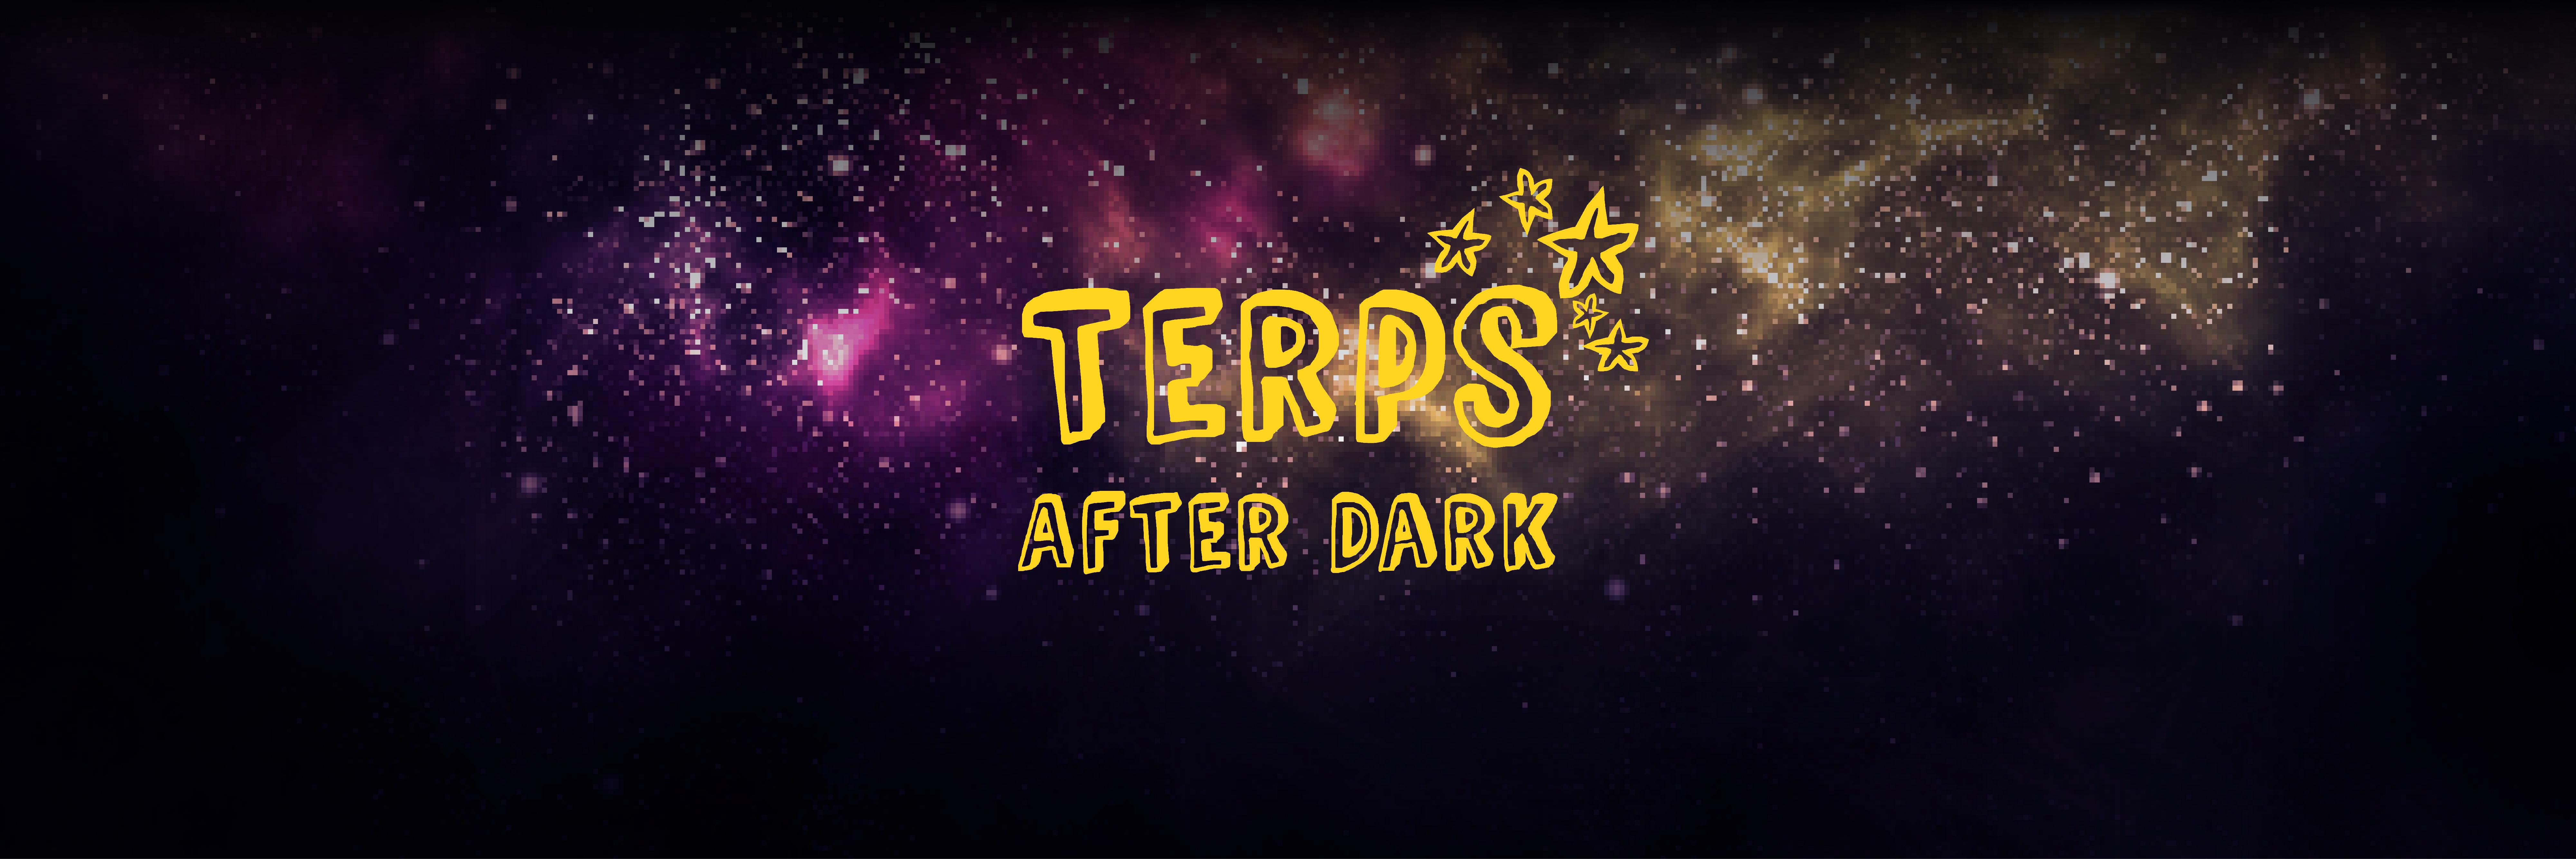 Terps After Dark